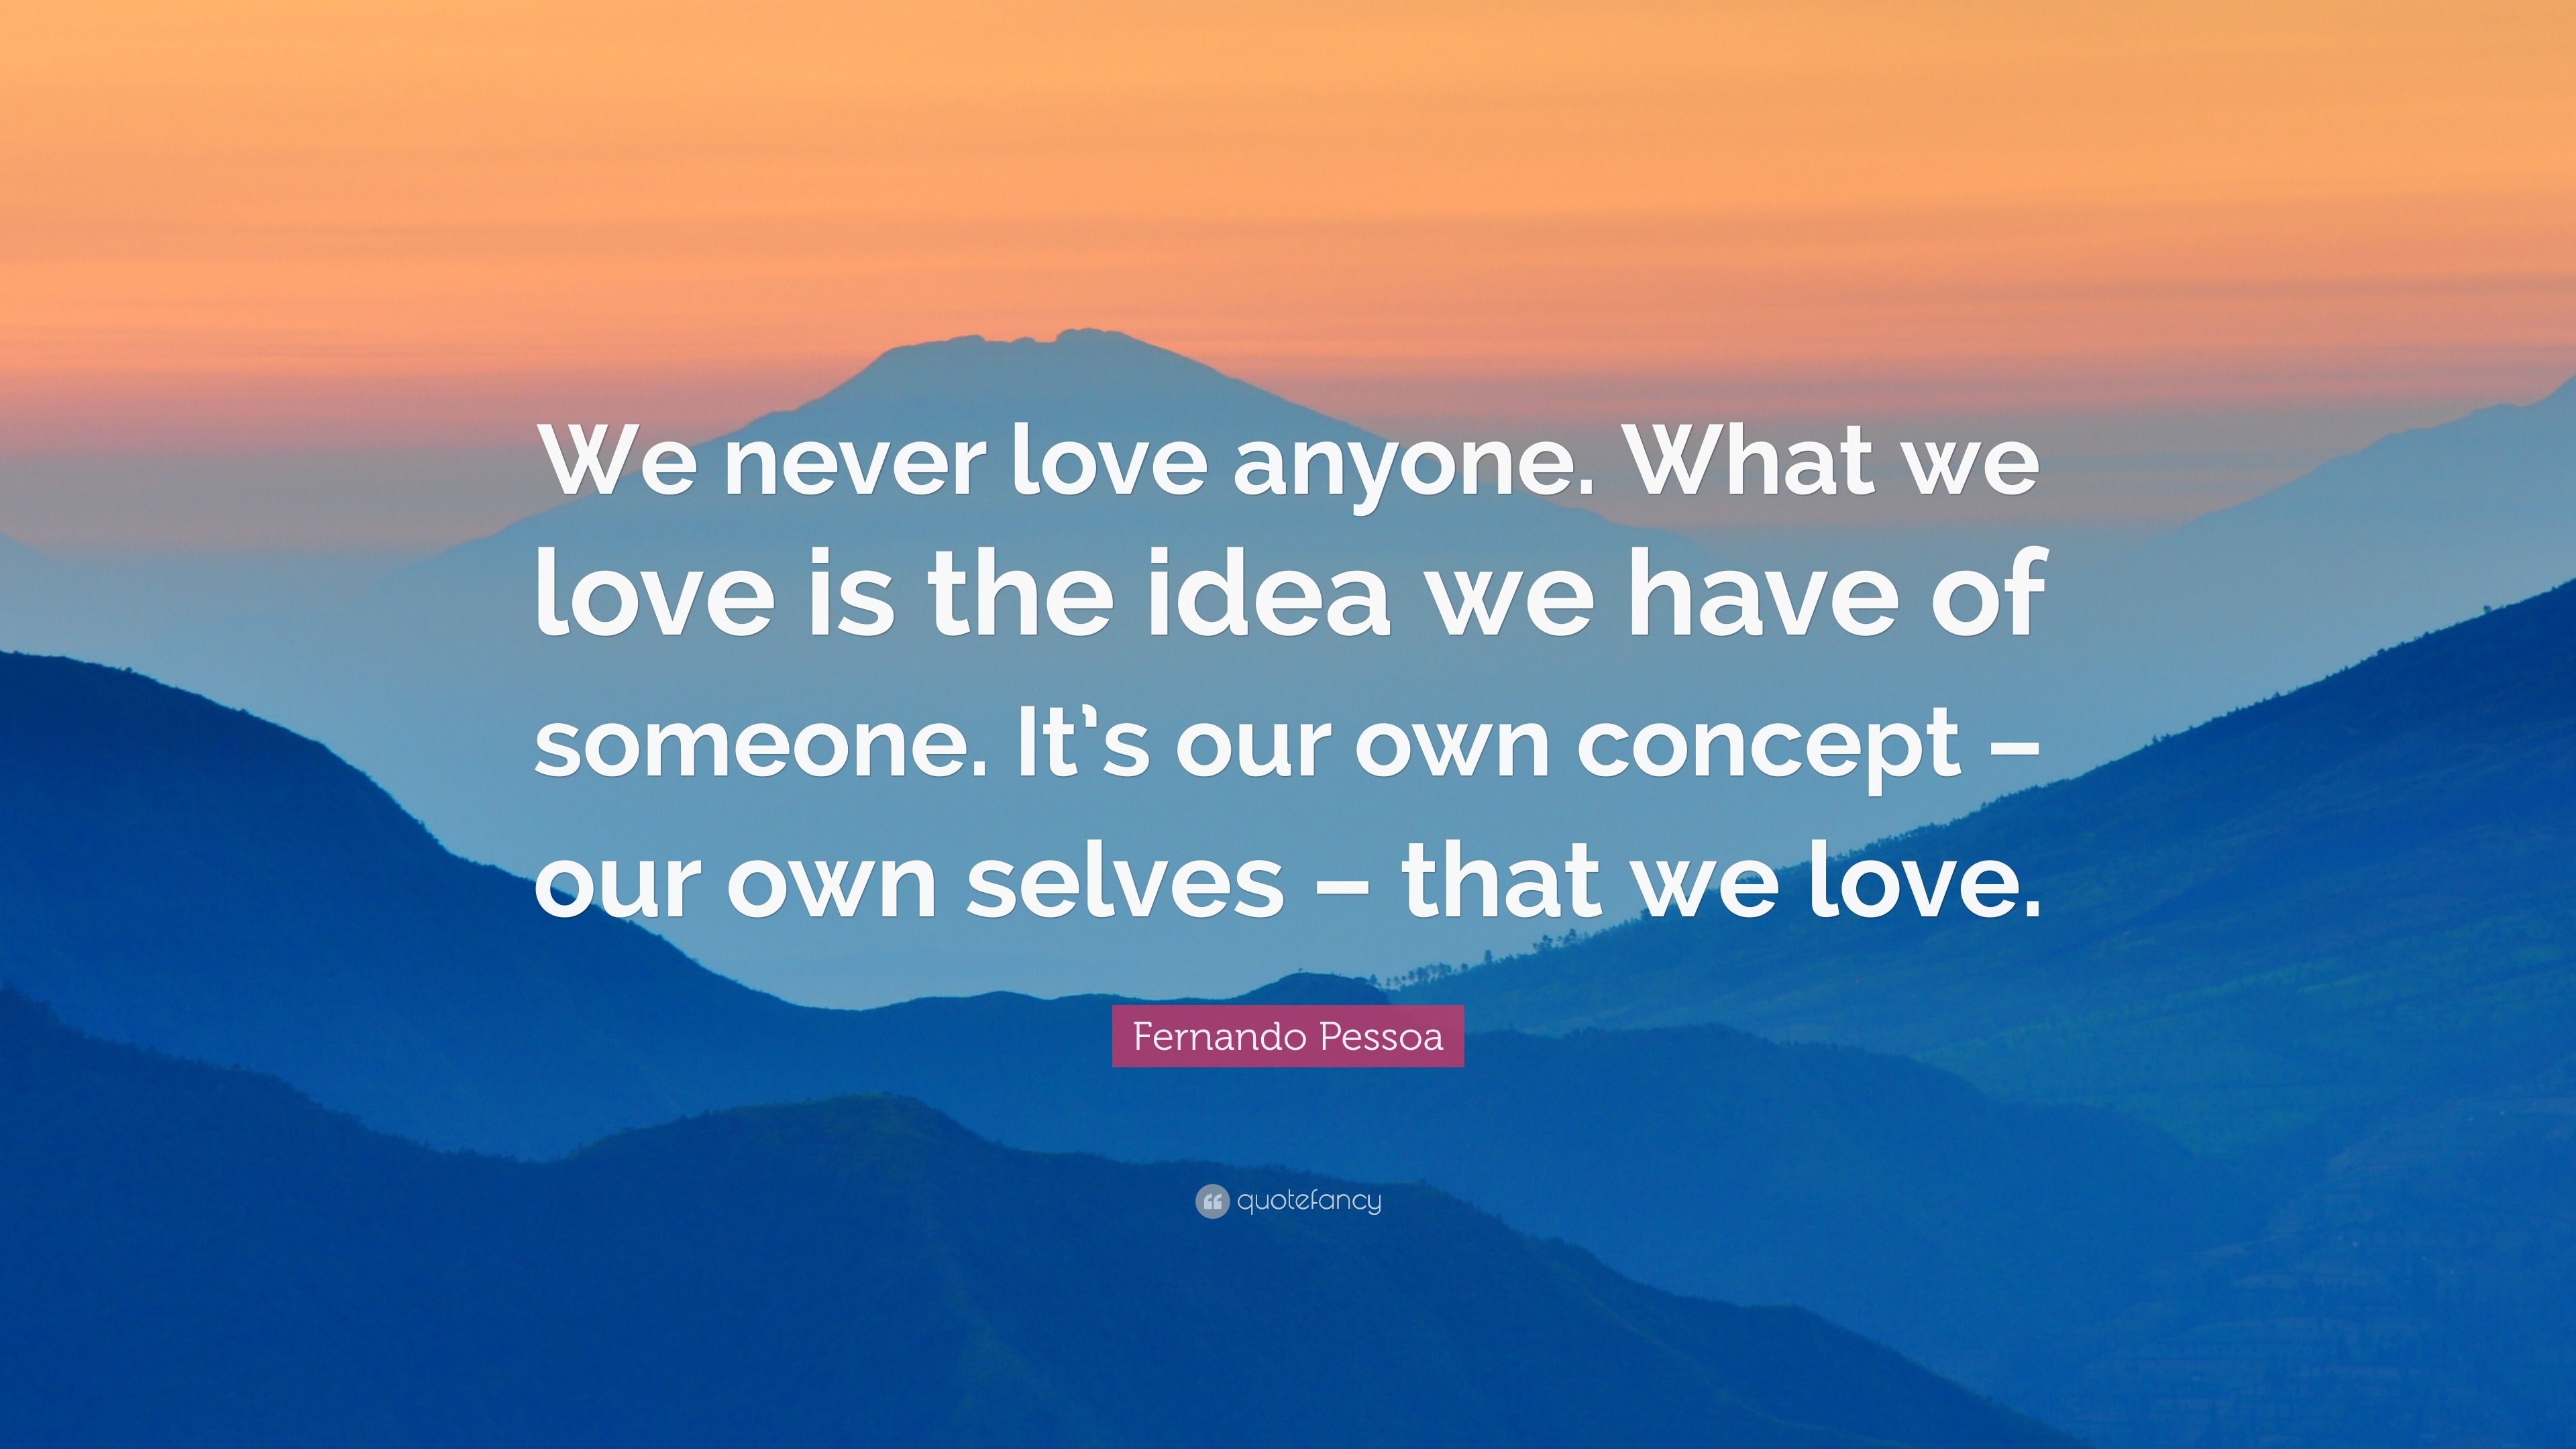 Fernando Pessoa Quote “We never love anyone What we love is the idea